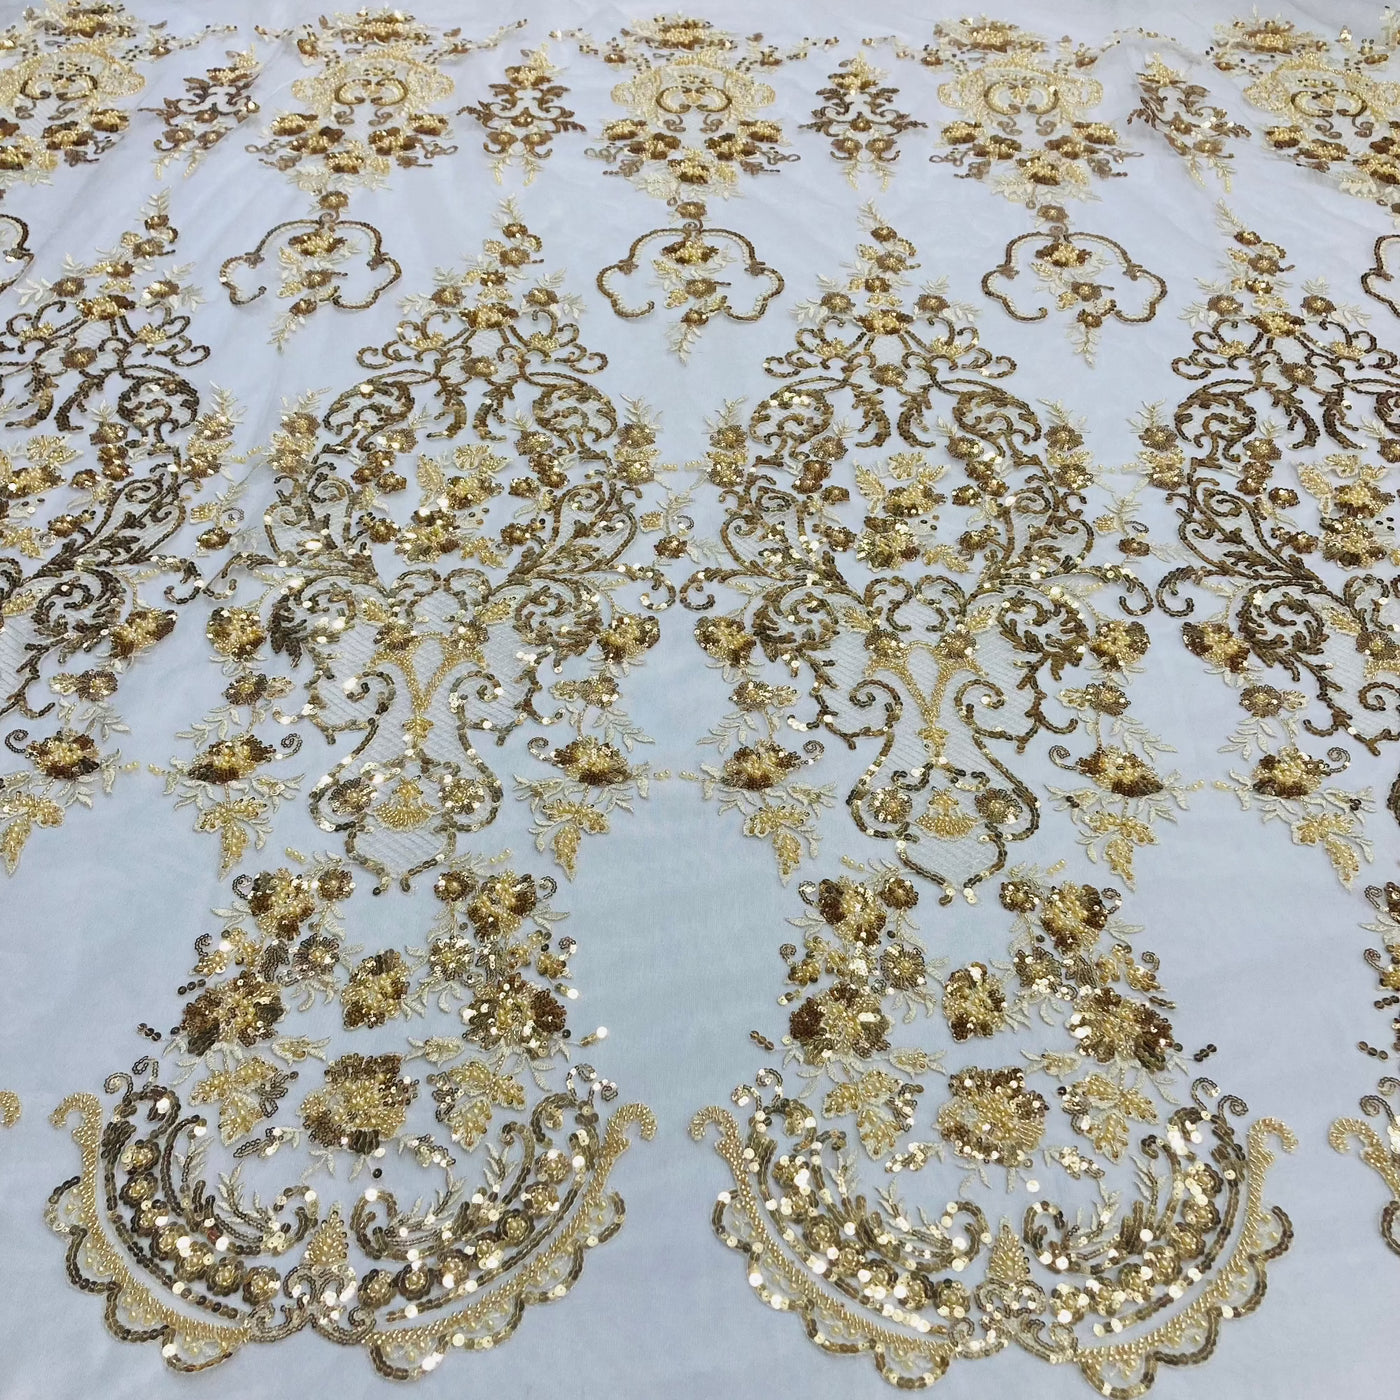 Beaded Lace Fabric Embroidered on 100% Polyester Net Mesh | LaceUSA - GD-210907 Gold